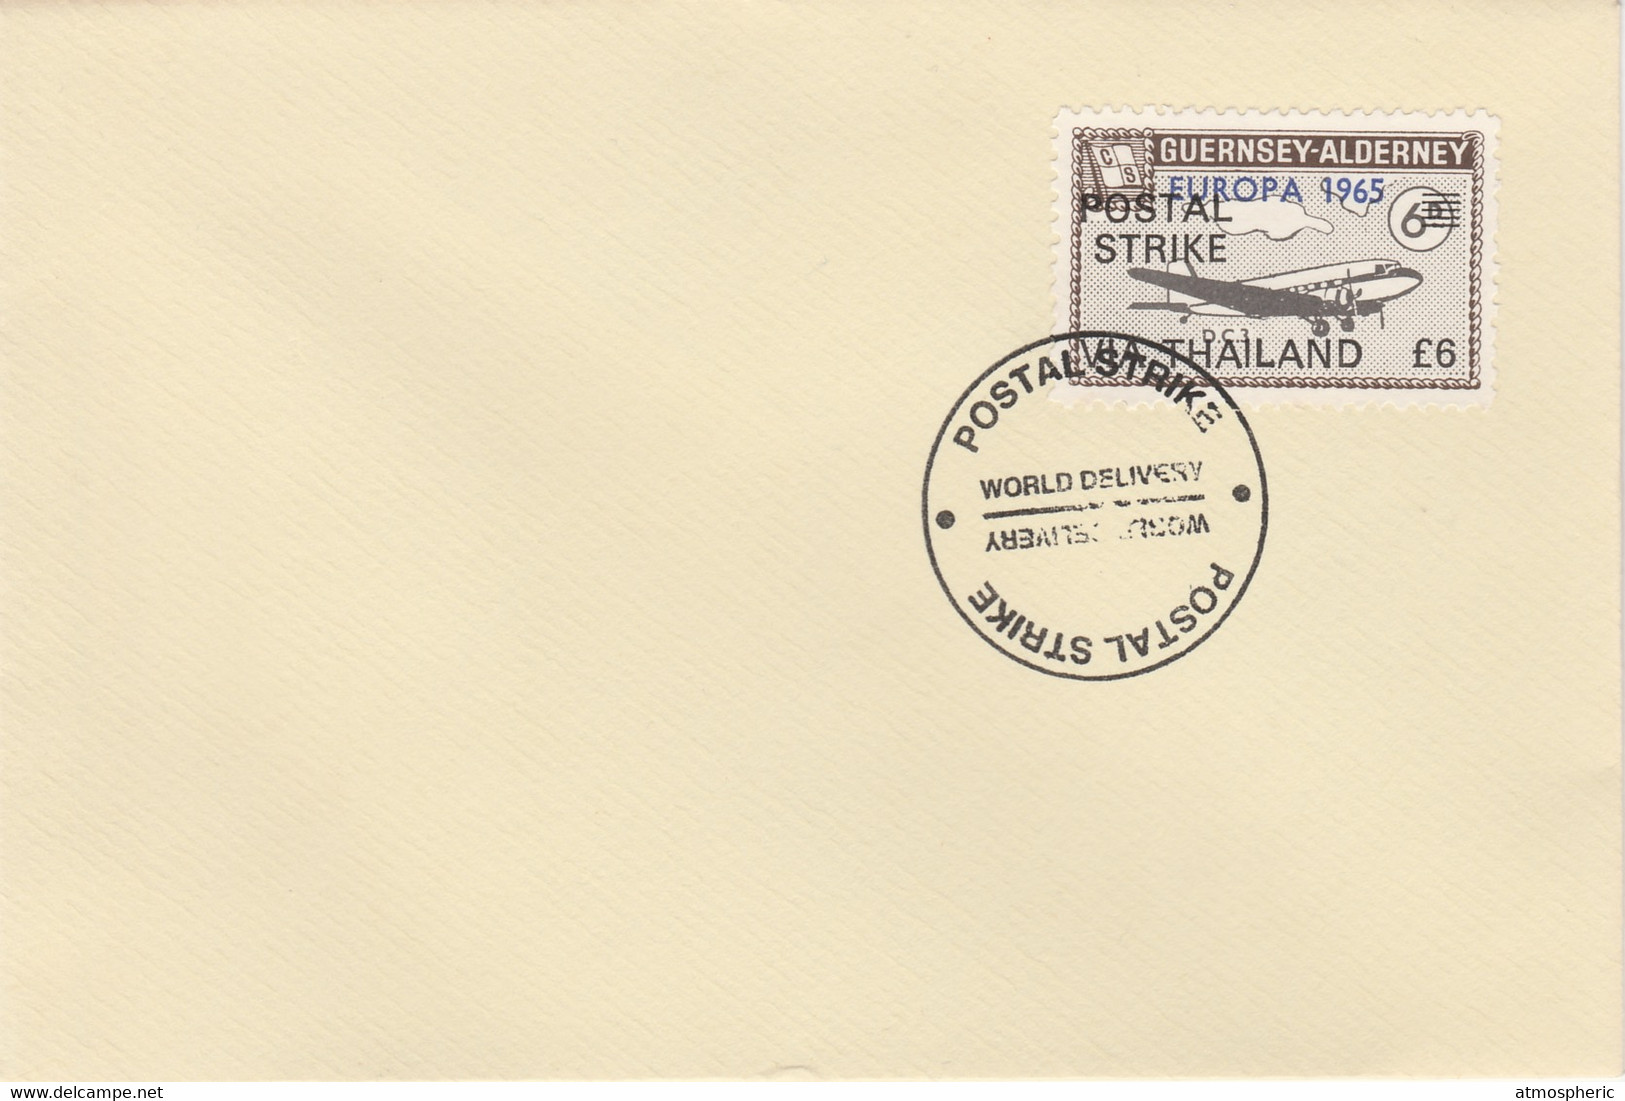 Guernsey - Alderney 1971 Postal Strike Cover To Thailand Bearing DC-3 6d Overprinted Europa 1965 - Zonder Classificatie